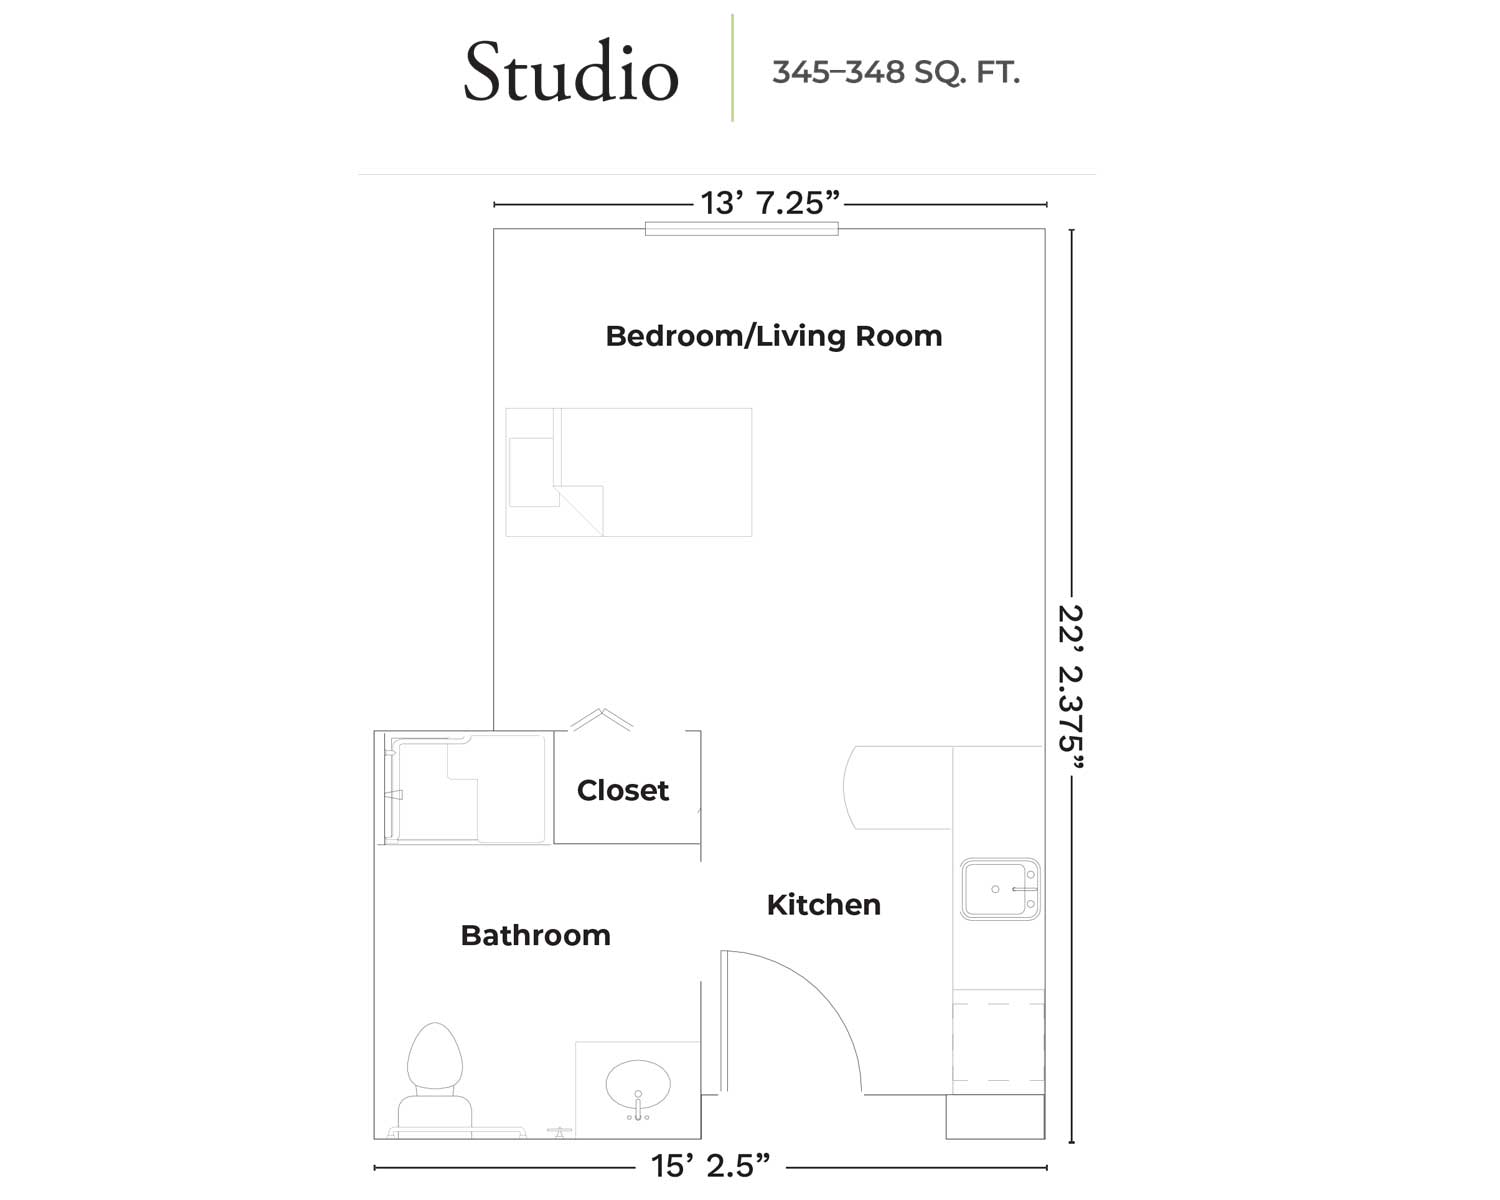 Floor plan of a small studio apartment with kitchen, bathroom, closet, and combined bedroom/living room.